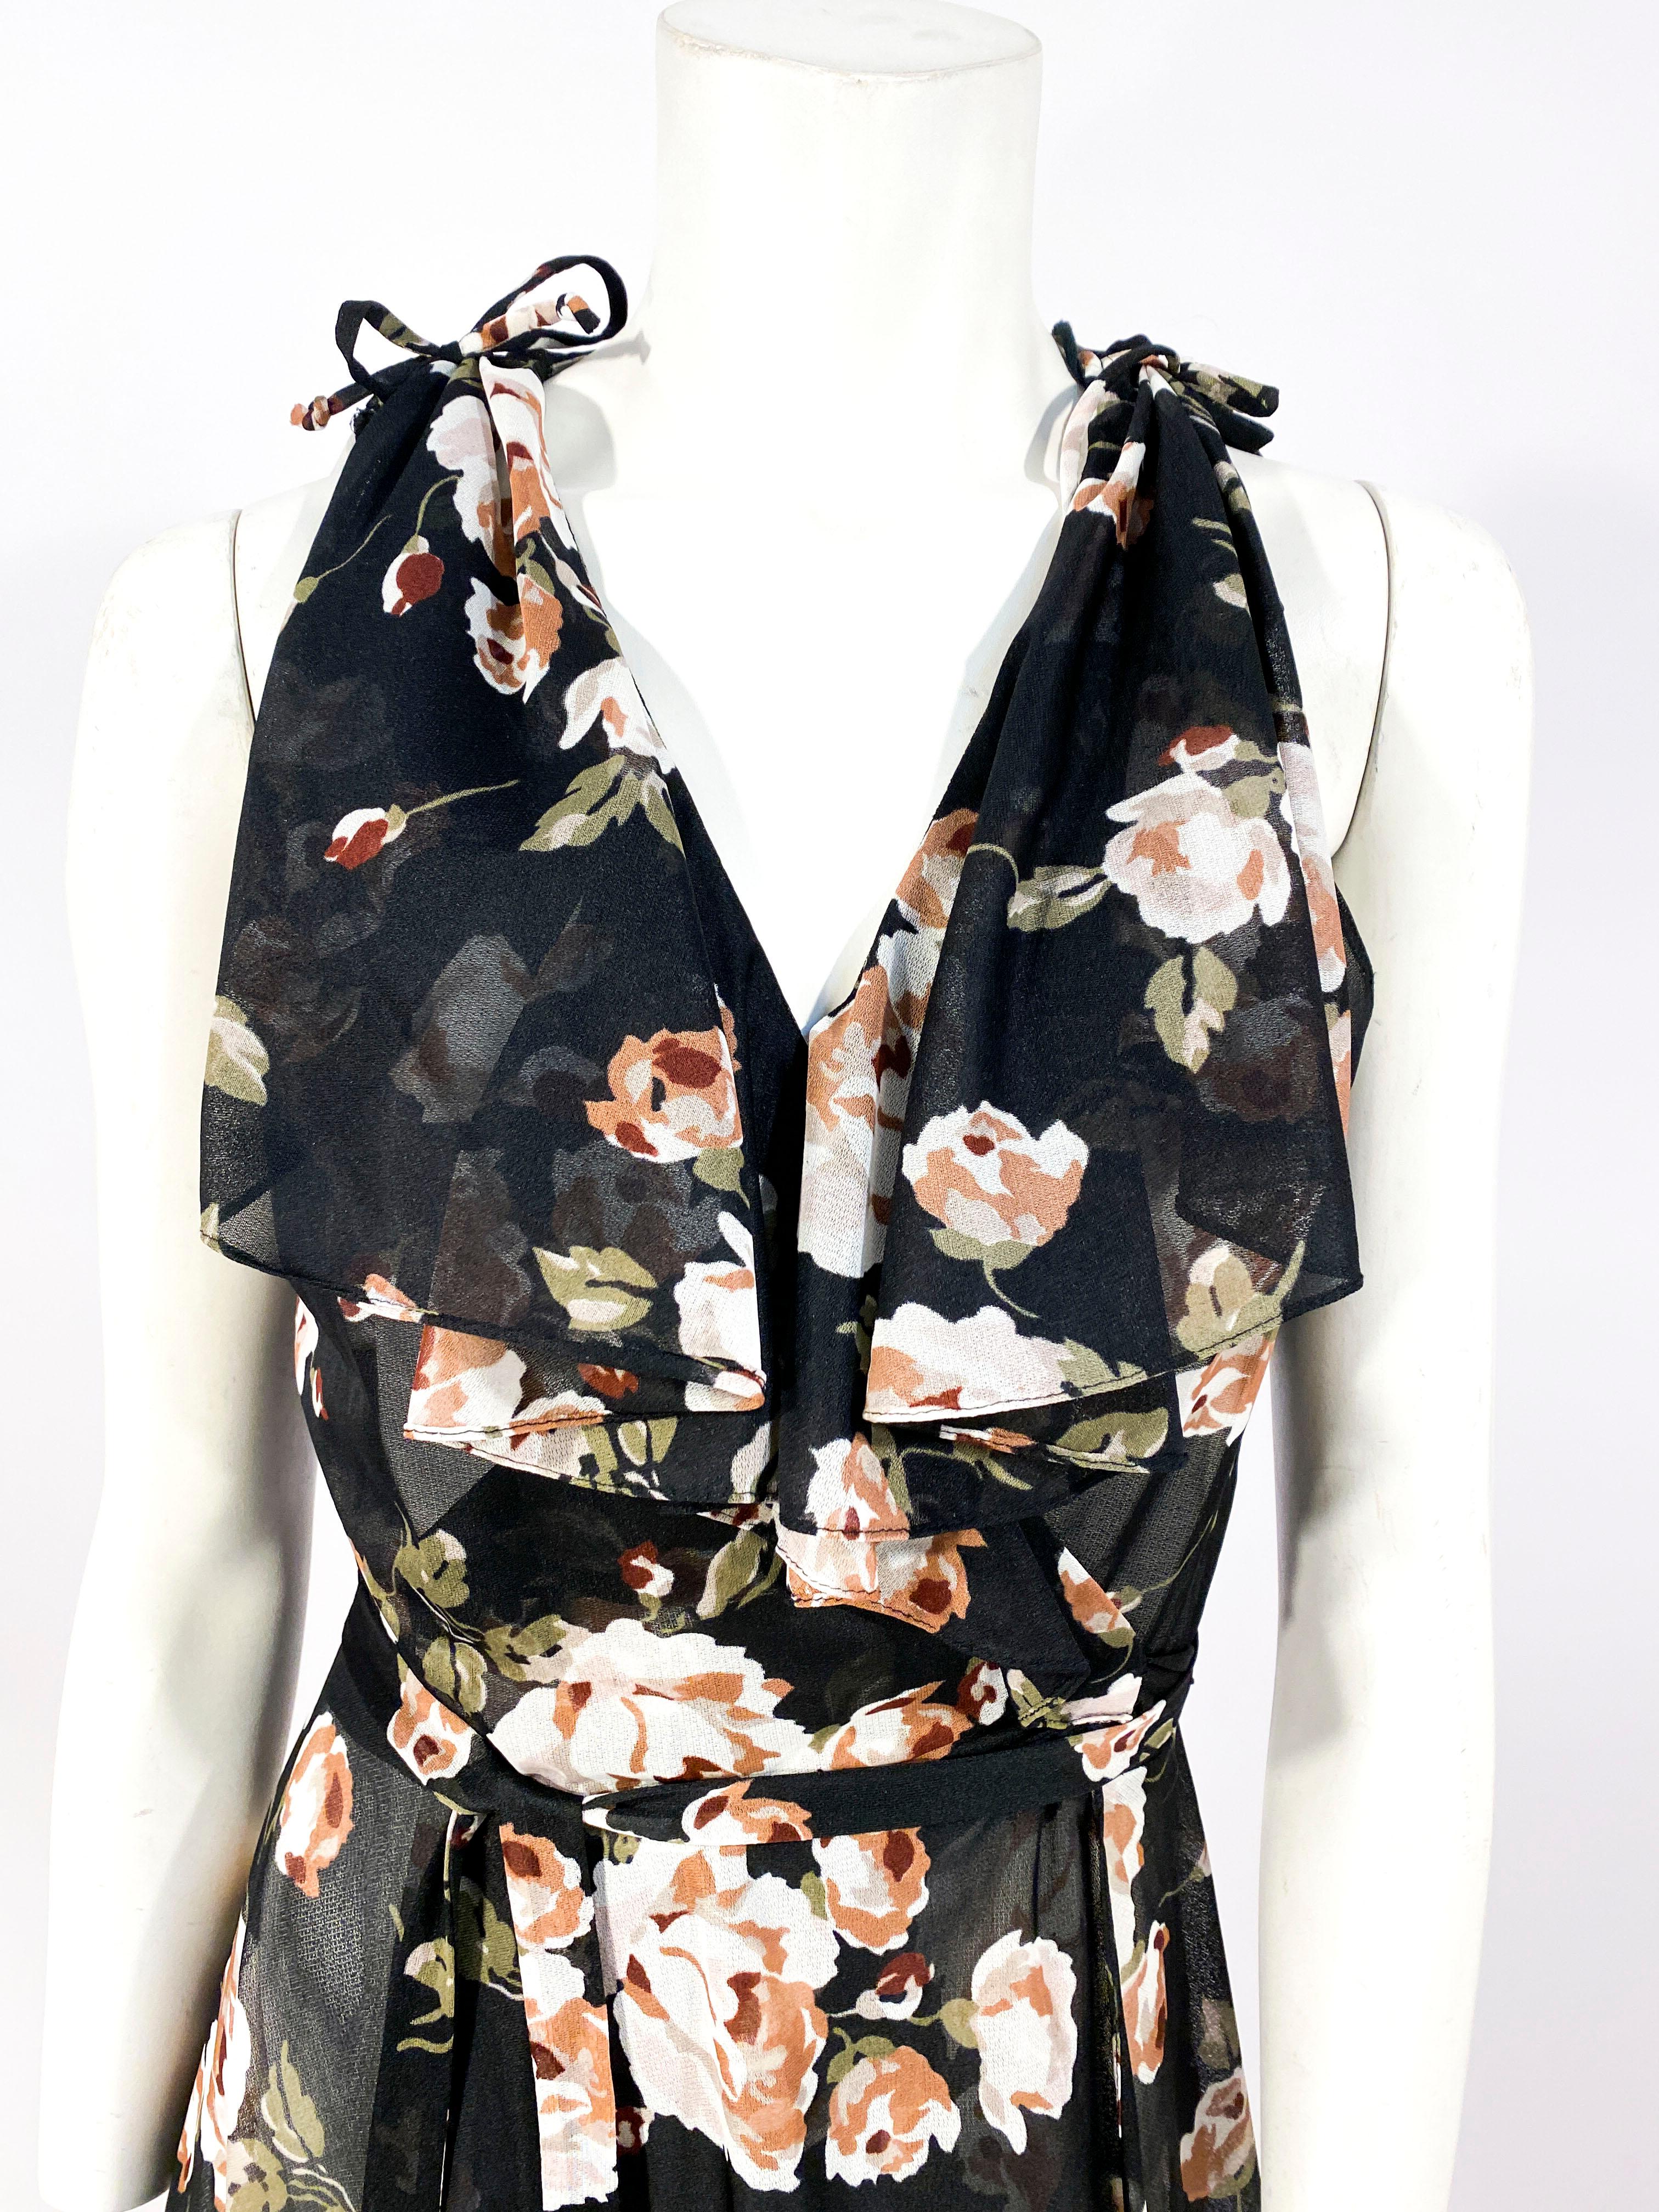 1970s black with floral print wrap dress with 1930-style neckline with drapes and faux cape in the back of the dress. The skirt is full with a slight taper to the hem. Since this is a wrap dress it can accommodate a range of sizes (approx. a US size